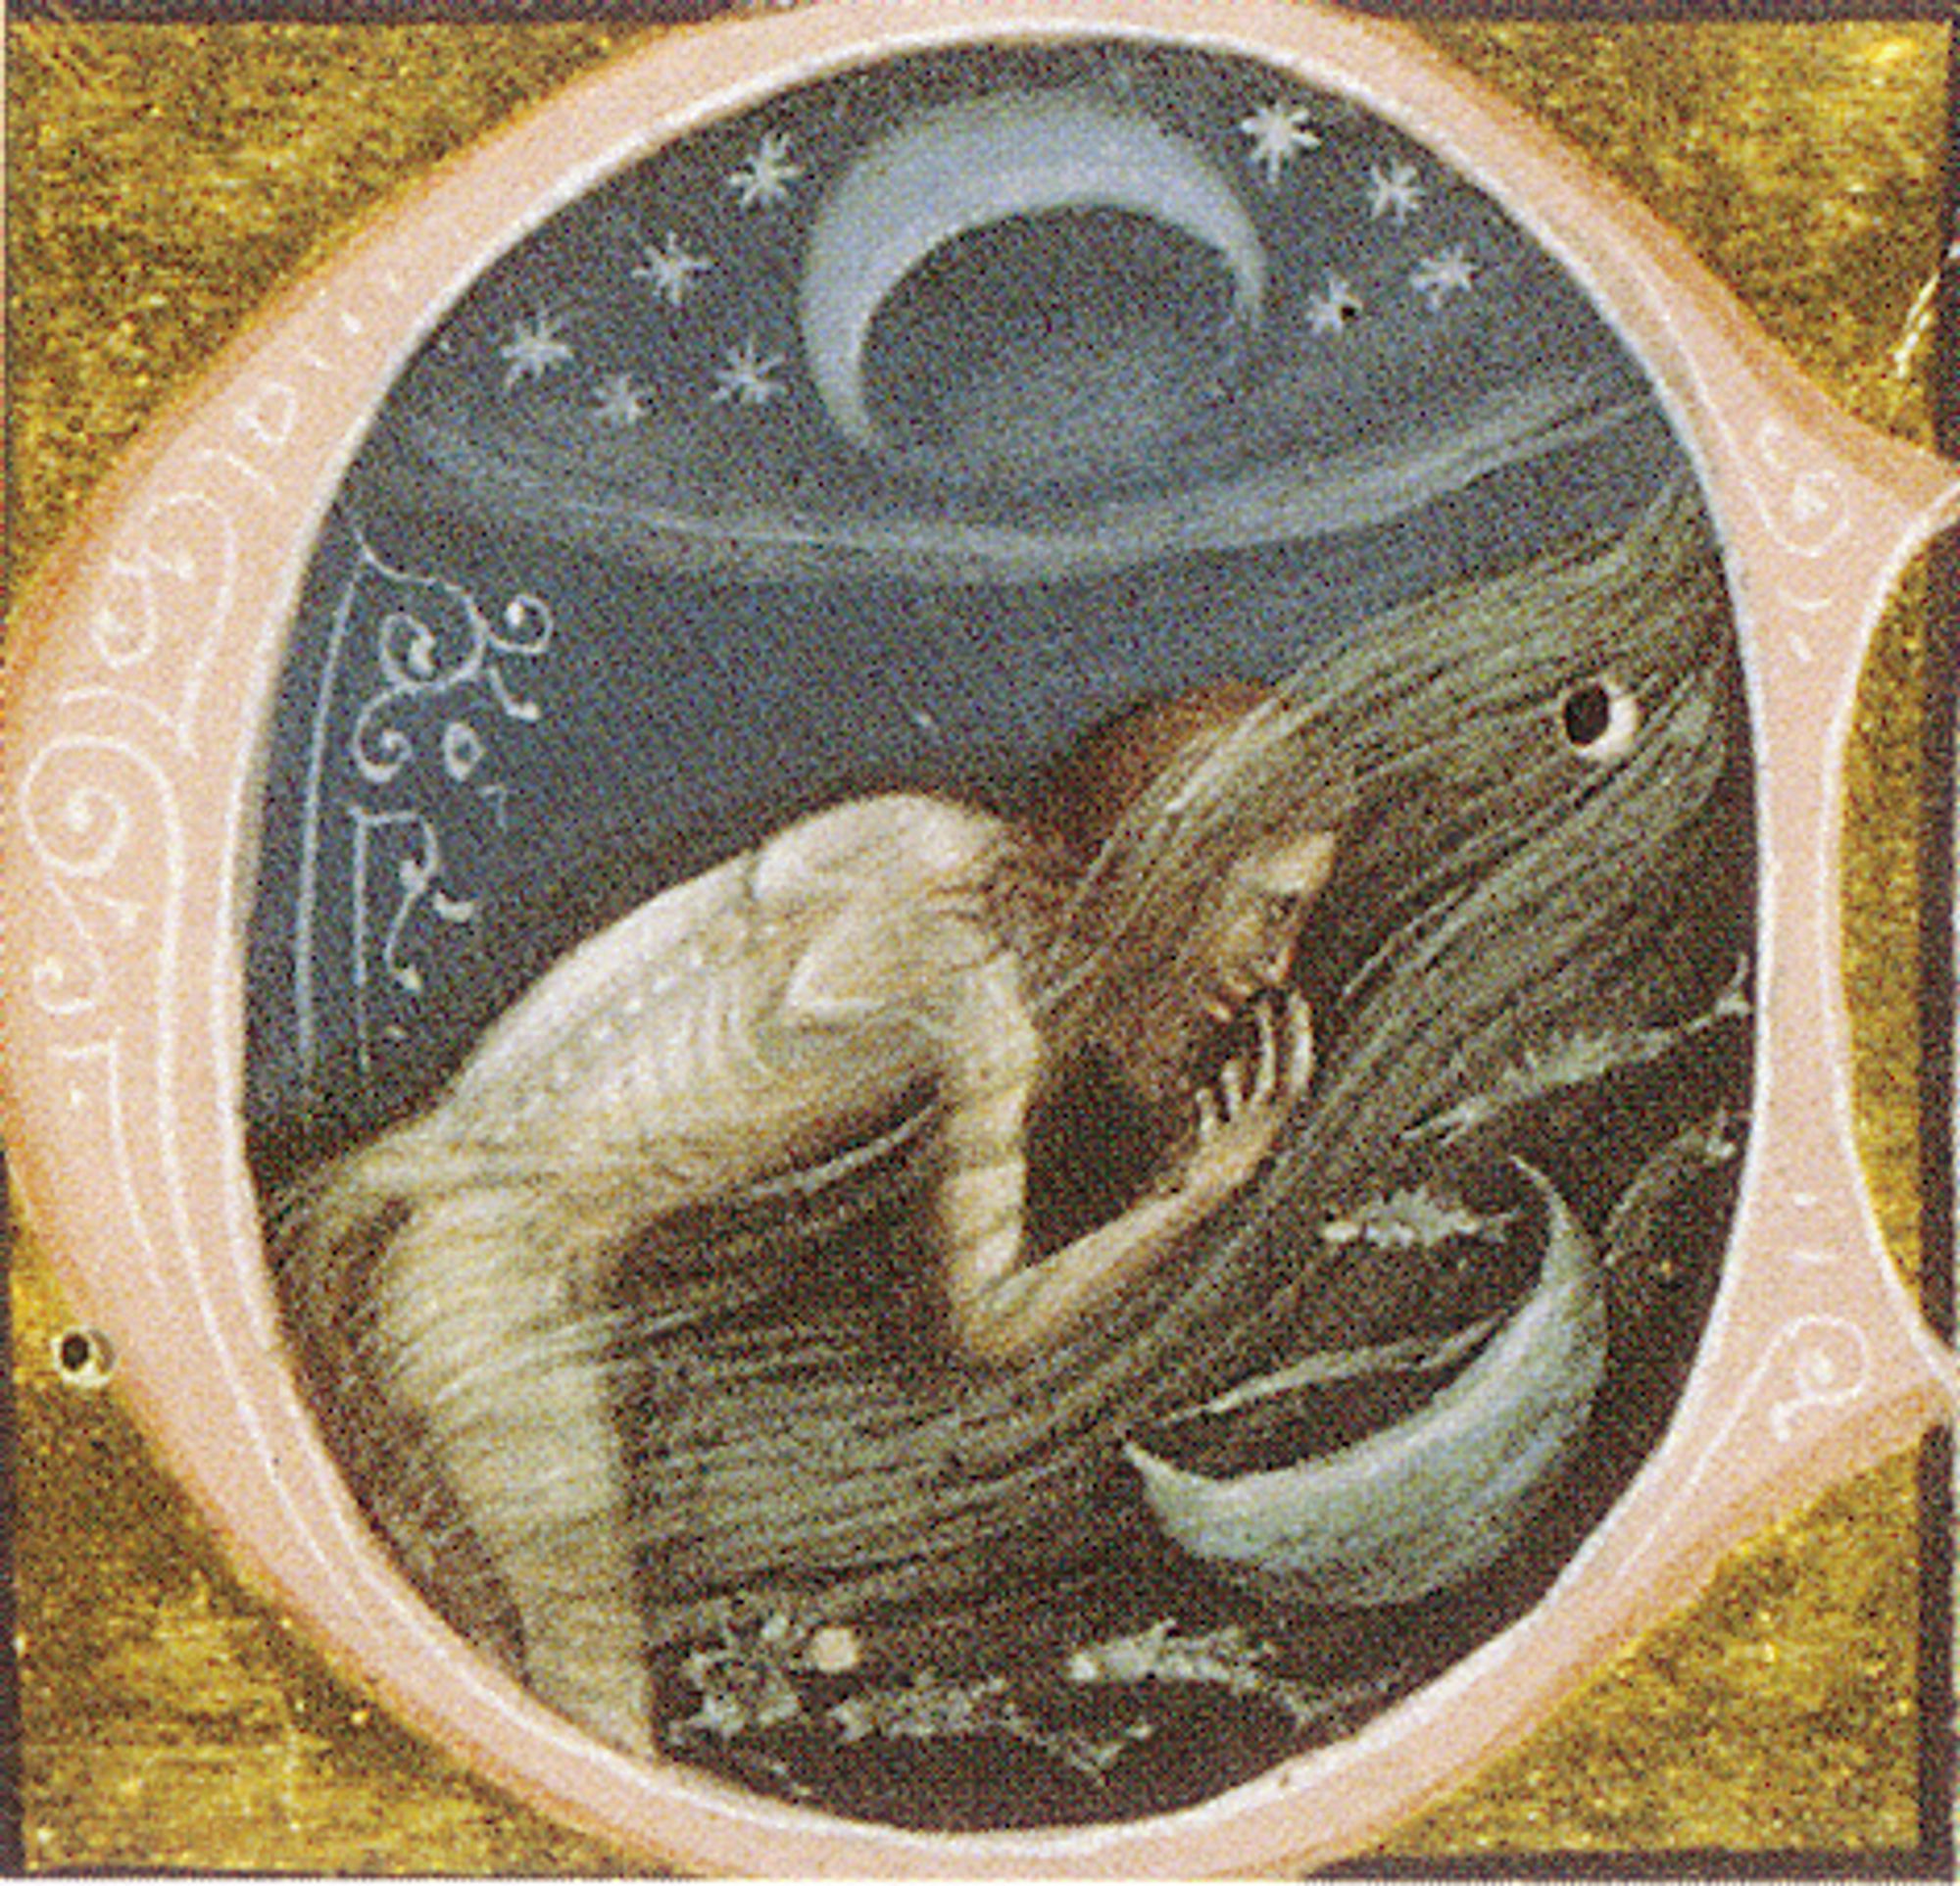 A peach coloured ocular shape encompasses the image. Inside of it an emaciated person with long flowing hair leans over into thinly painted lines that resemble the tentacles of a squid, with its eye looking down at the human bowing before it. A crescent below and above edge the circle. Outside of the confines of the circle are ochre-finished brush strokes invoking textures of dried grass.